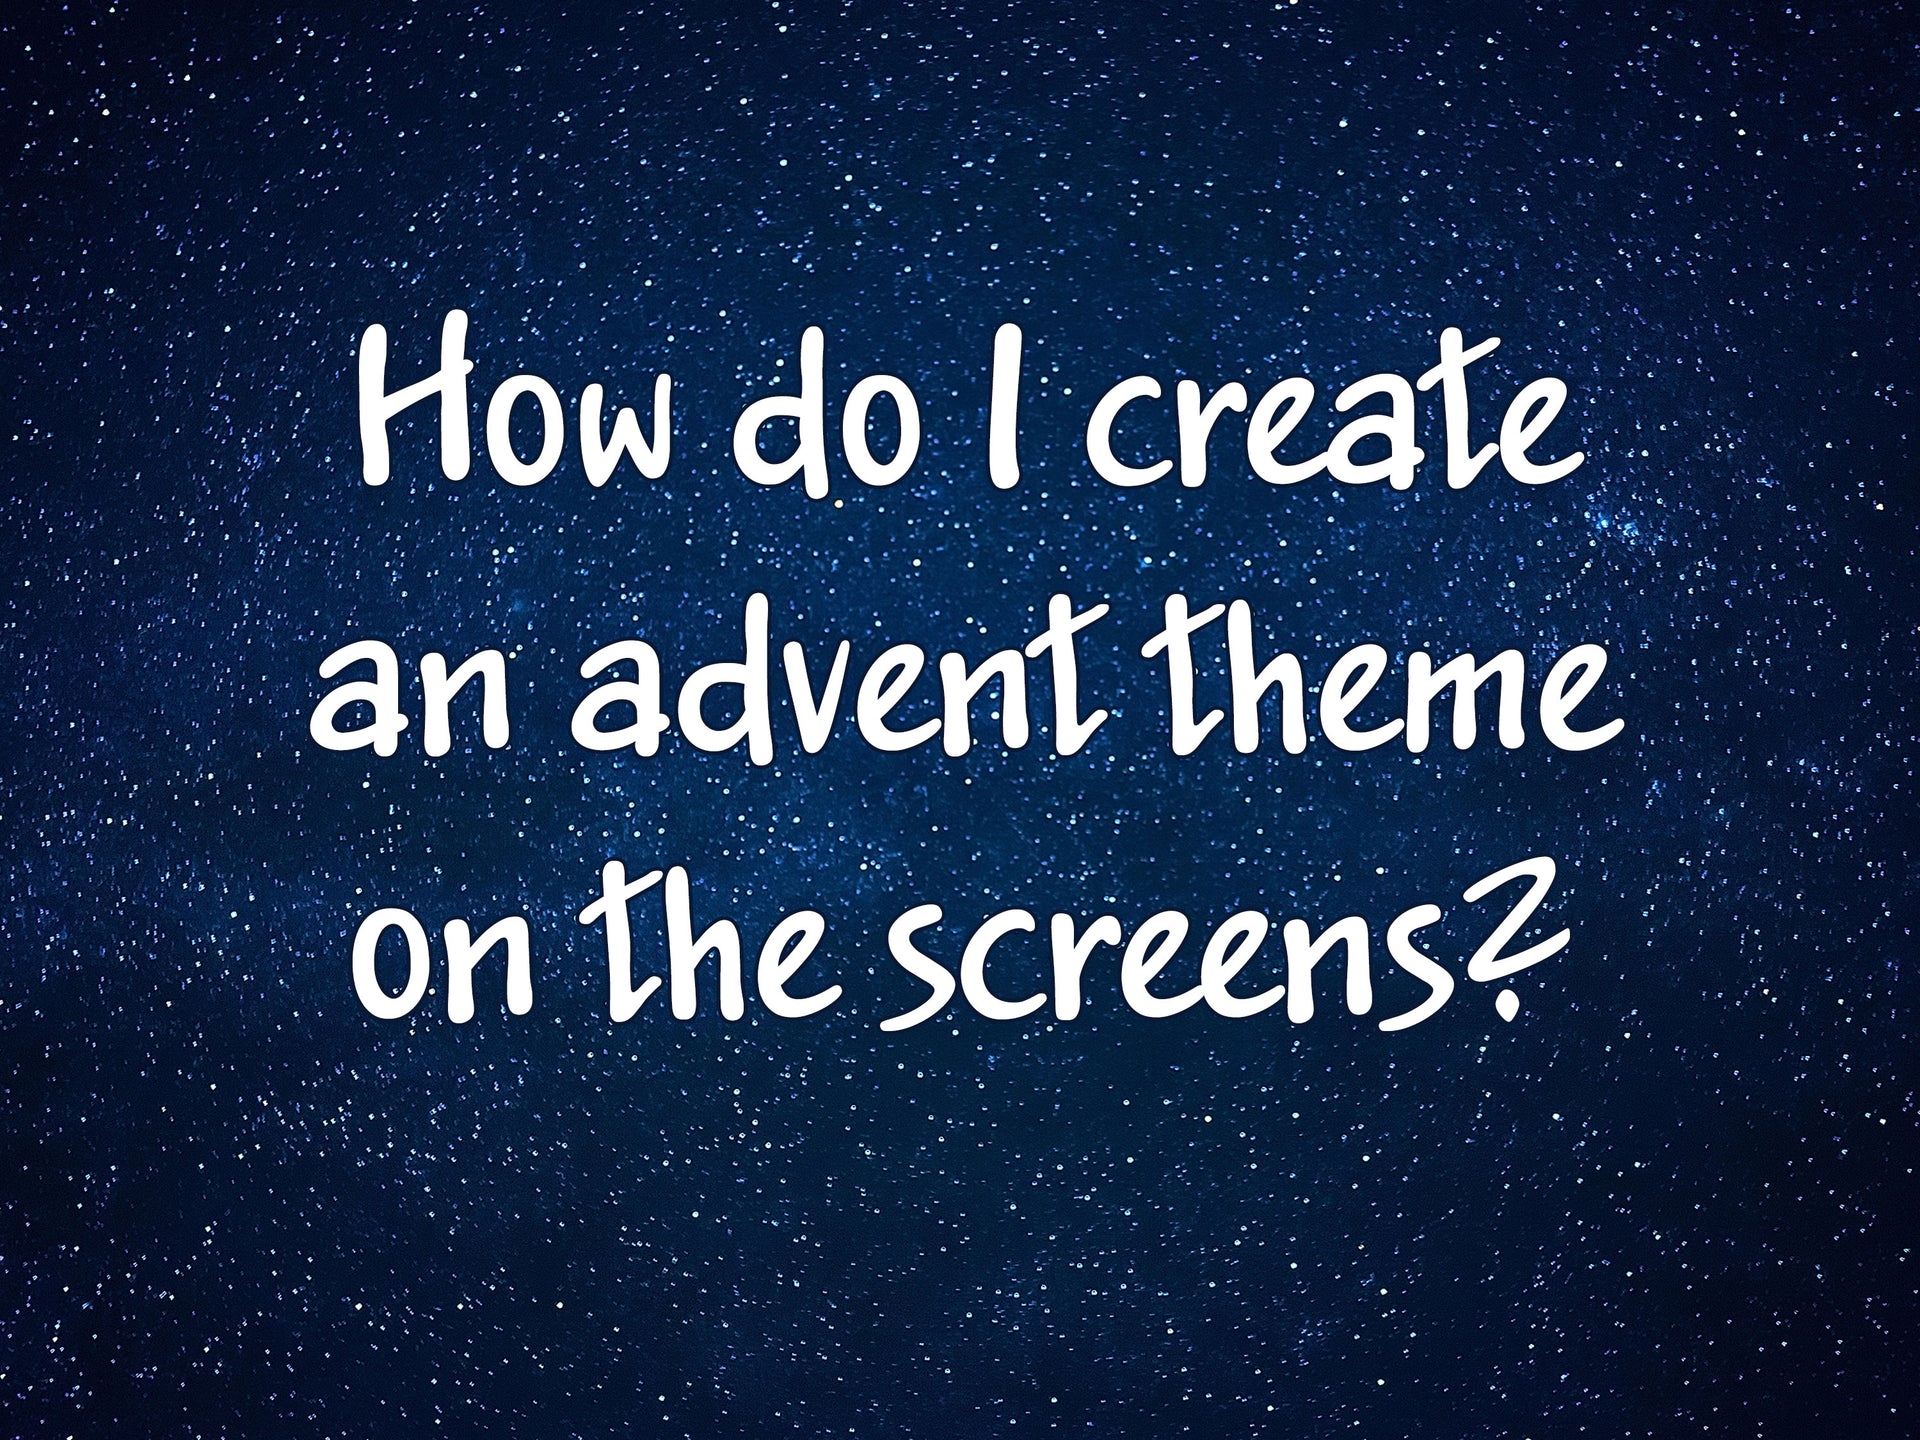 How to create an advent theme on the church screens